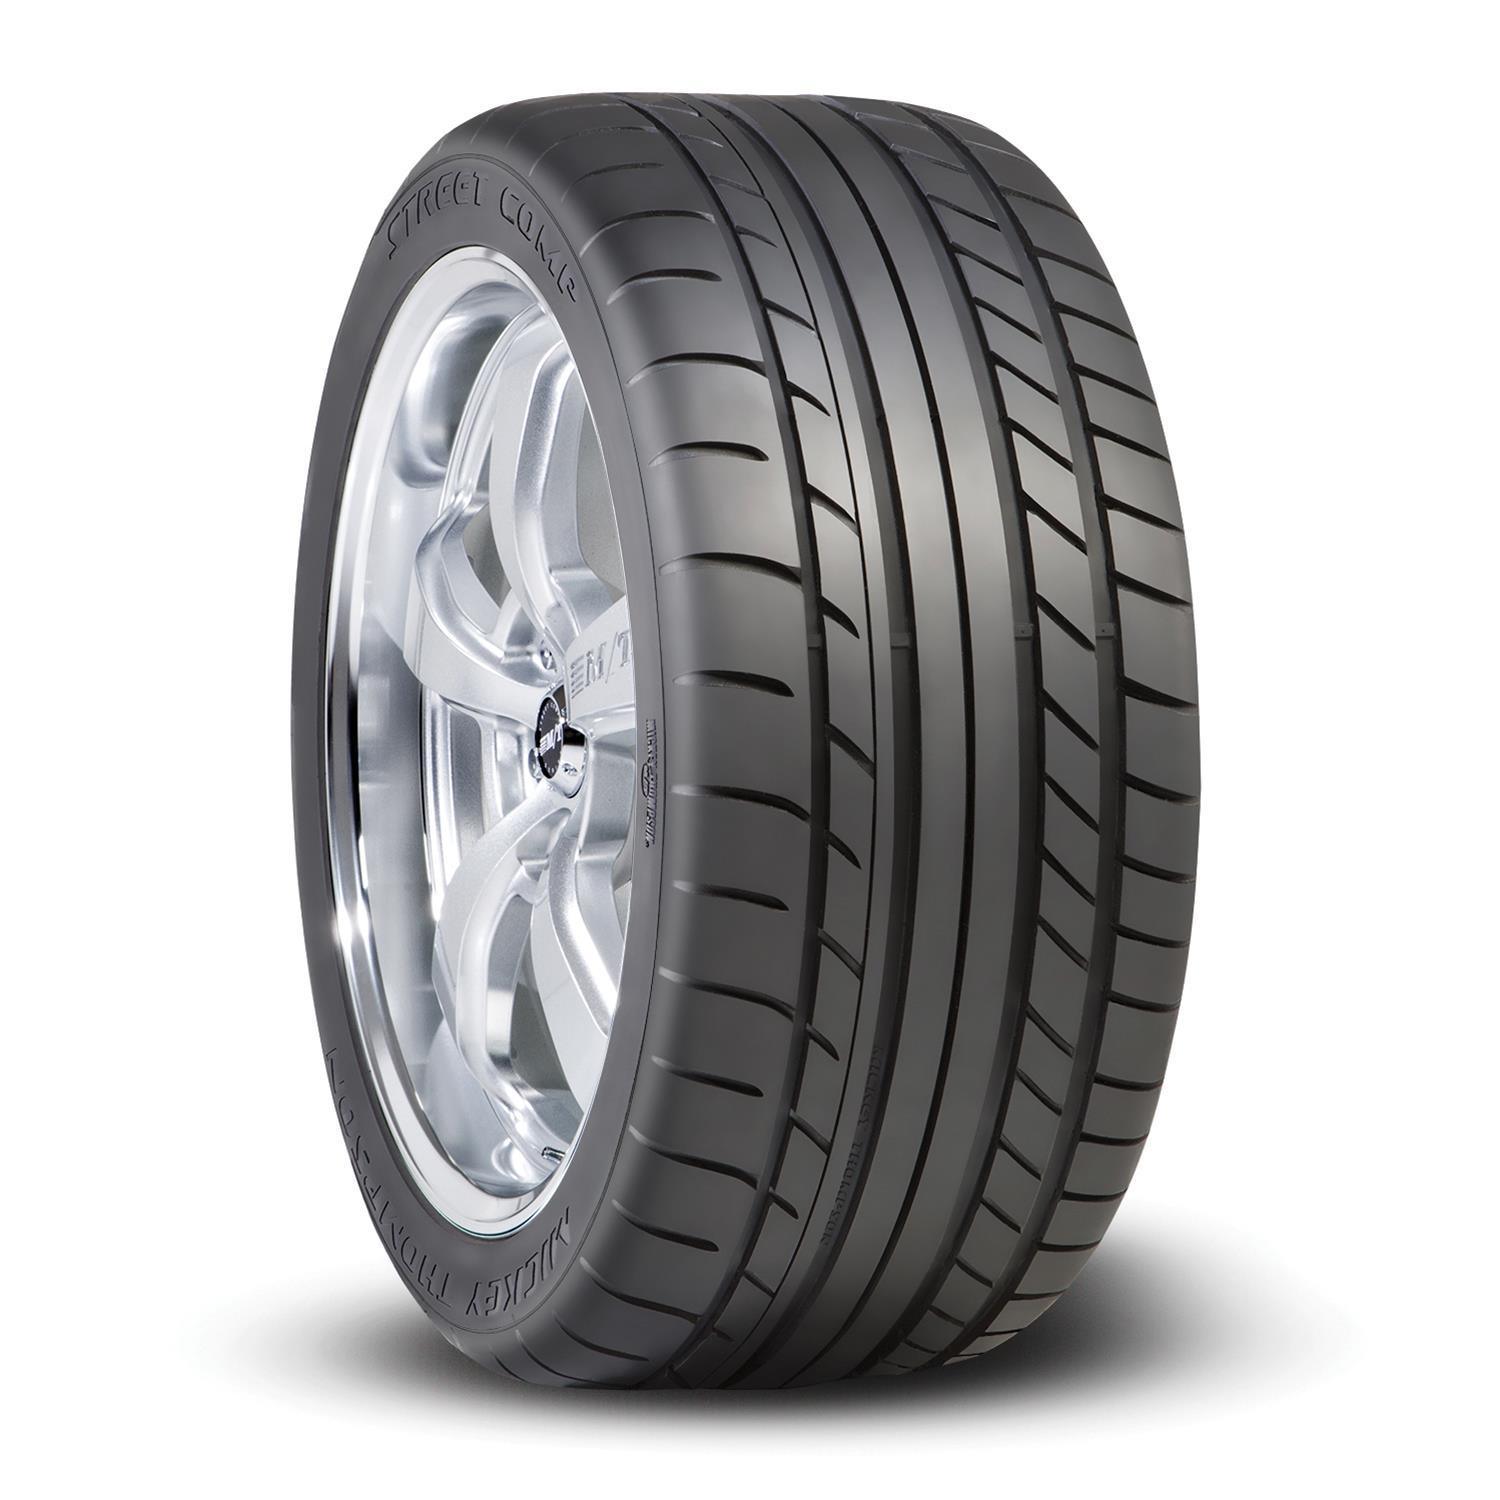 245/40R18 UHP Street Comp Tire - Burlile Performance Products